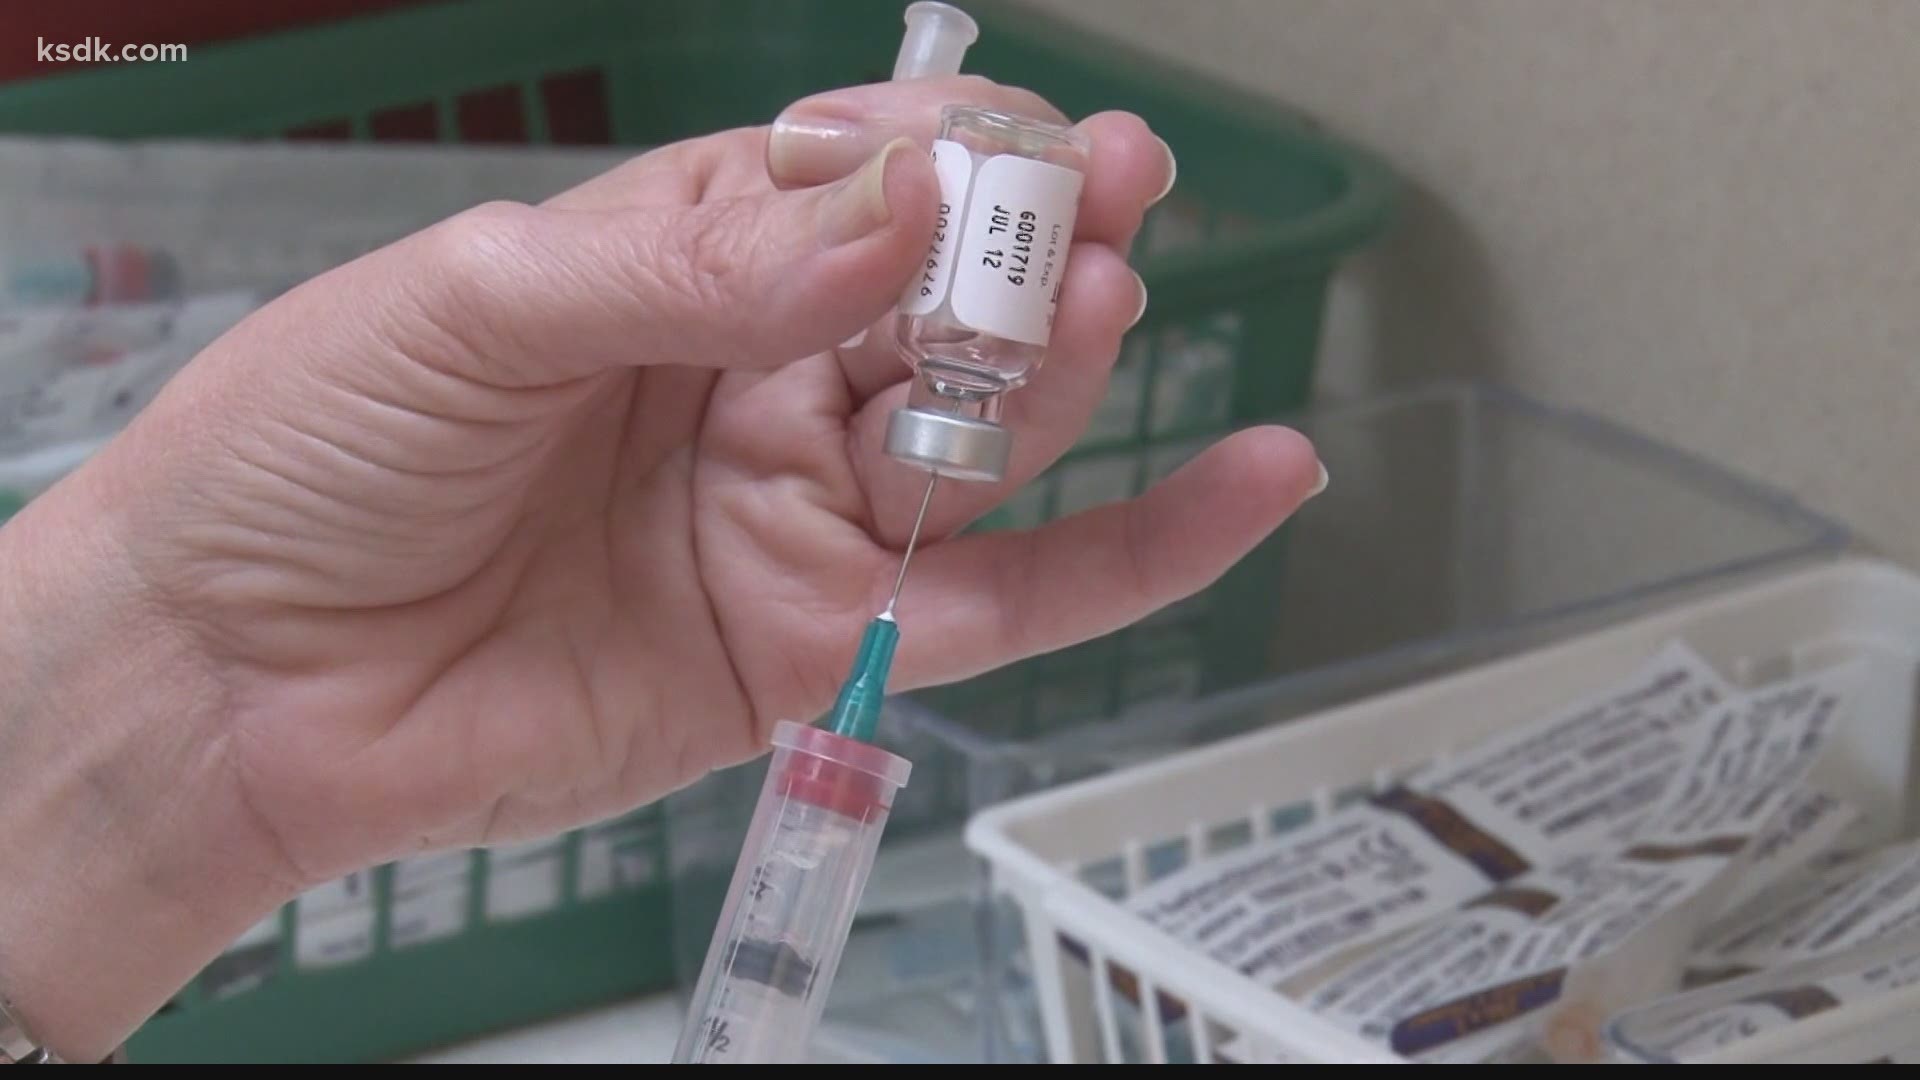 Public Health experts are emphasizing the need for flu shots this year